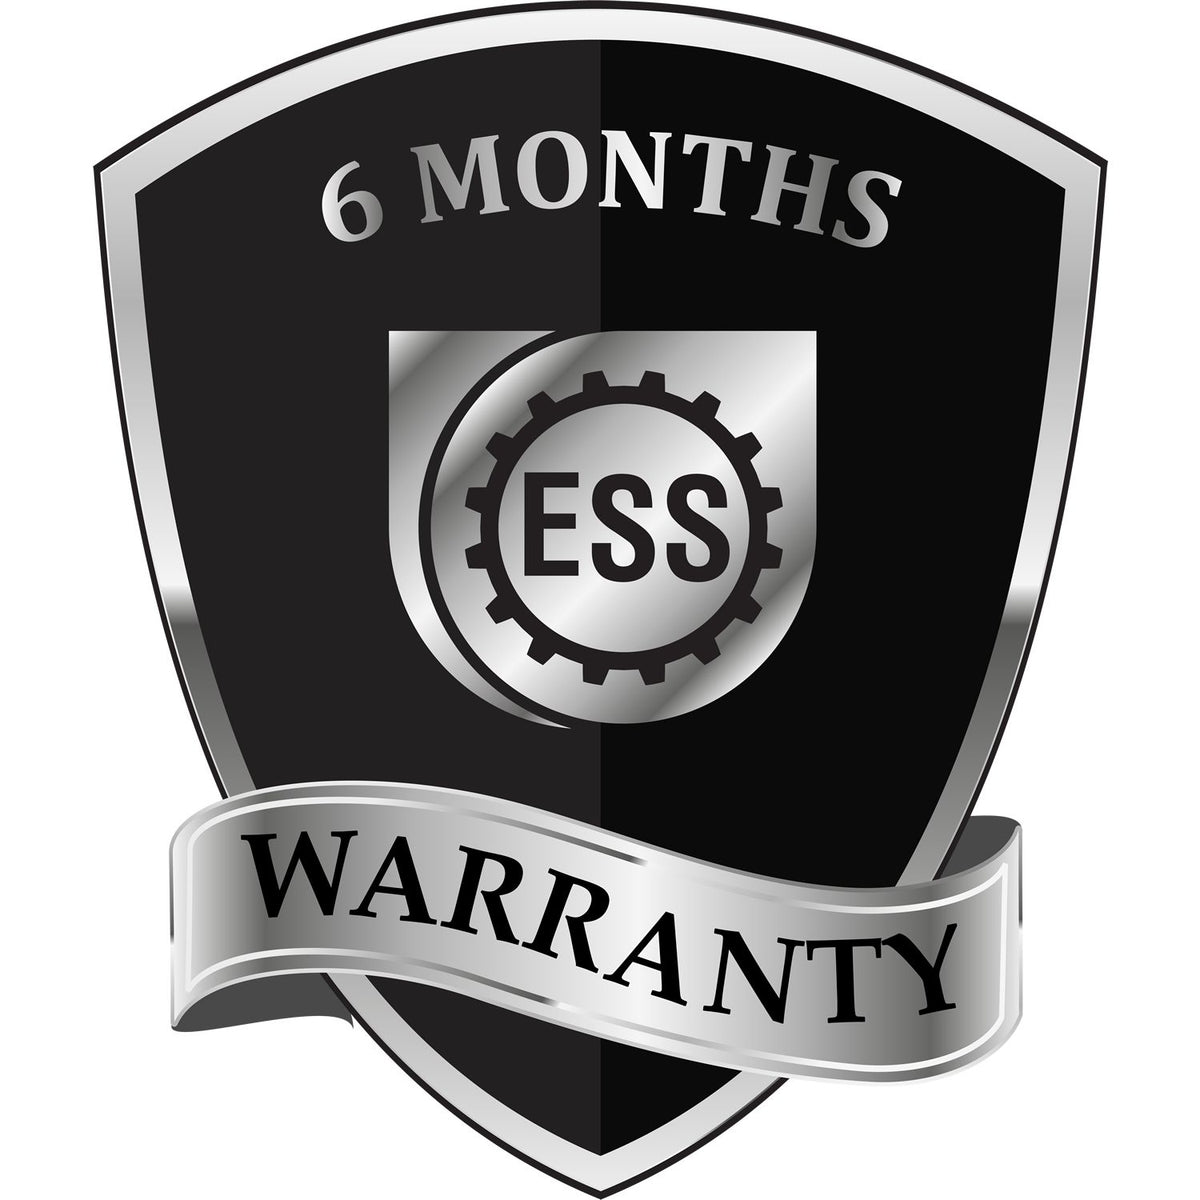 A black and silver badge or emblem showing warranty information for the Georgia Professional Geologist Seal Stamp